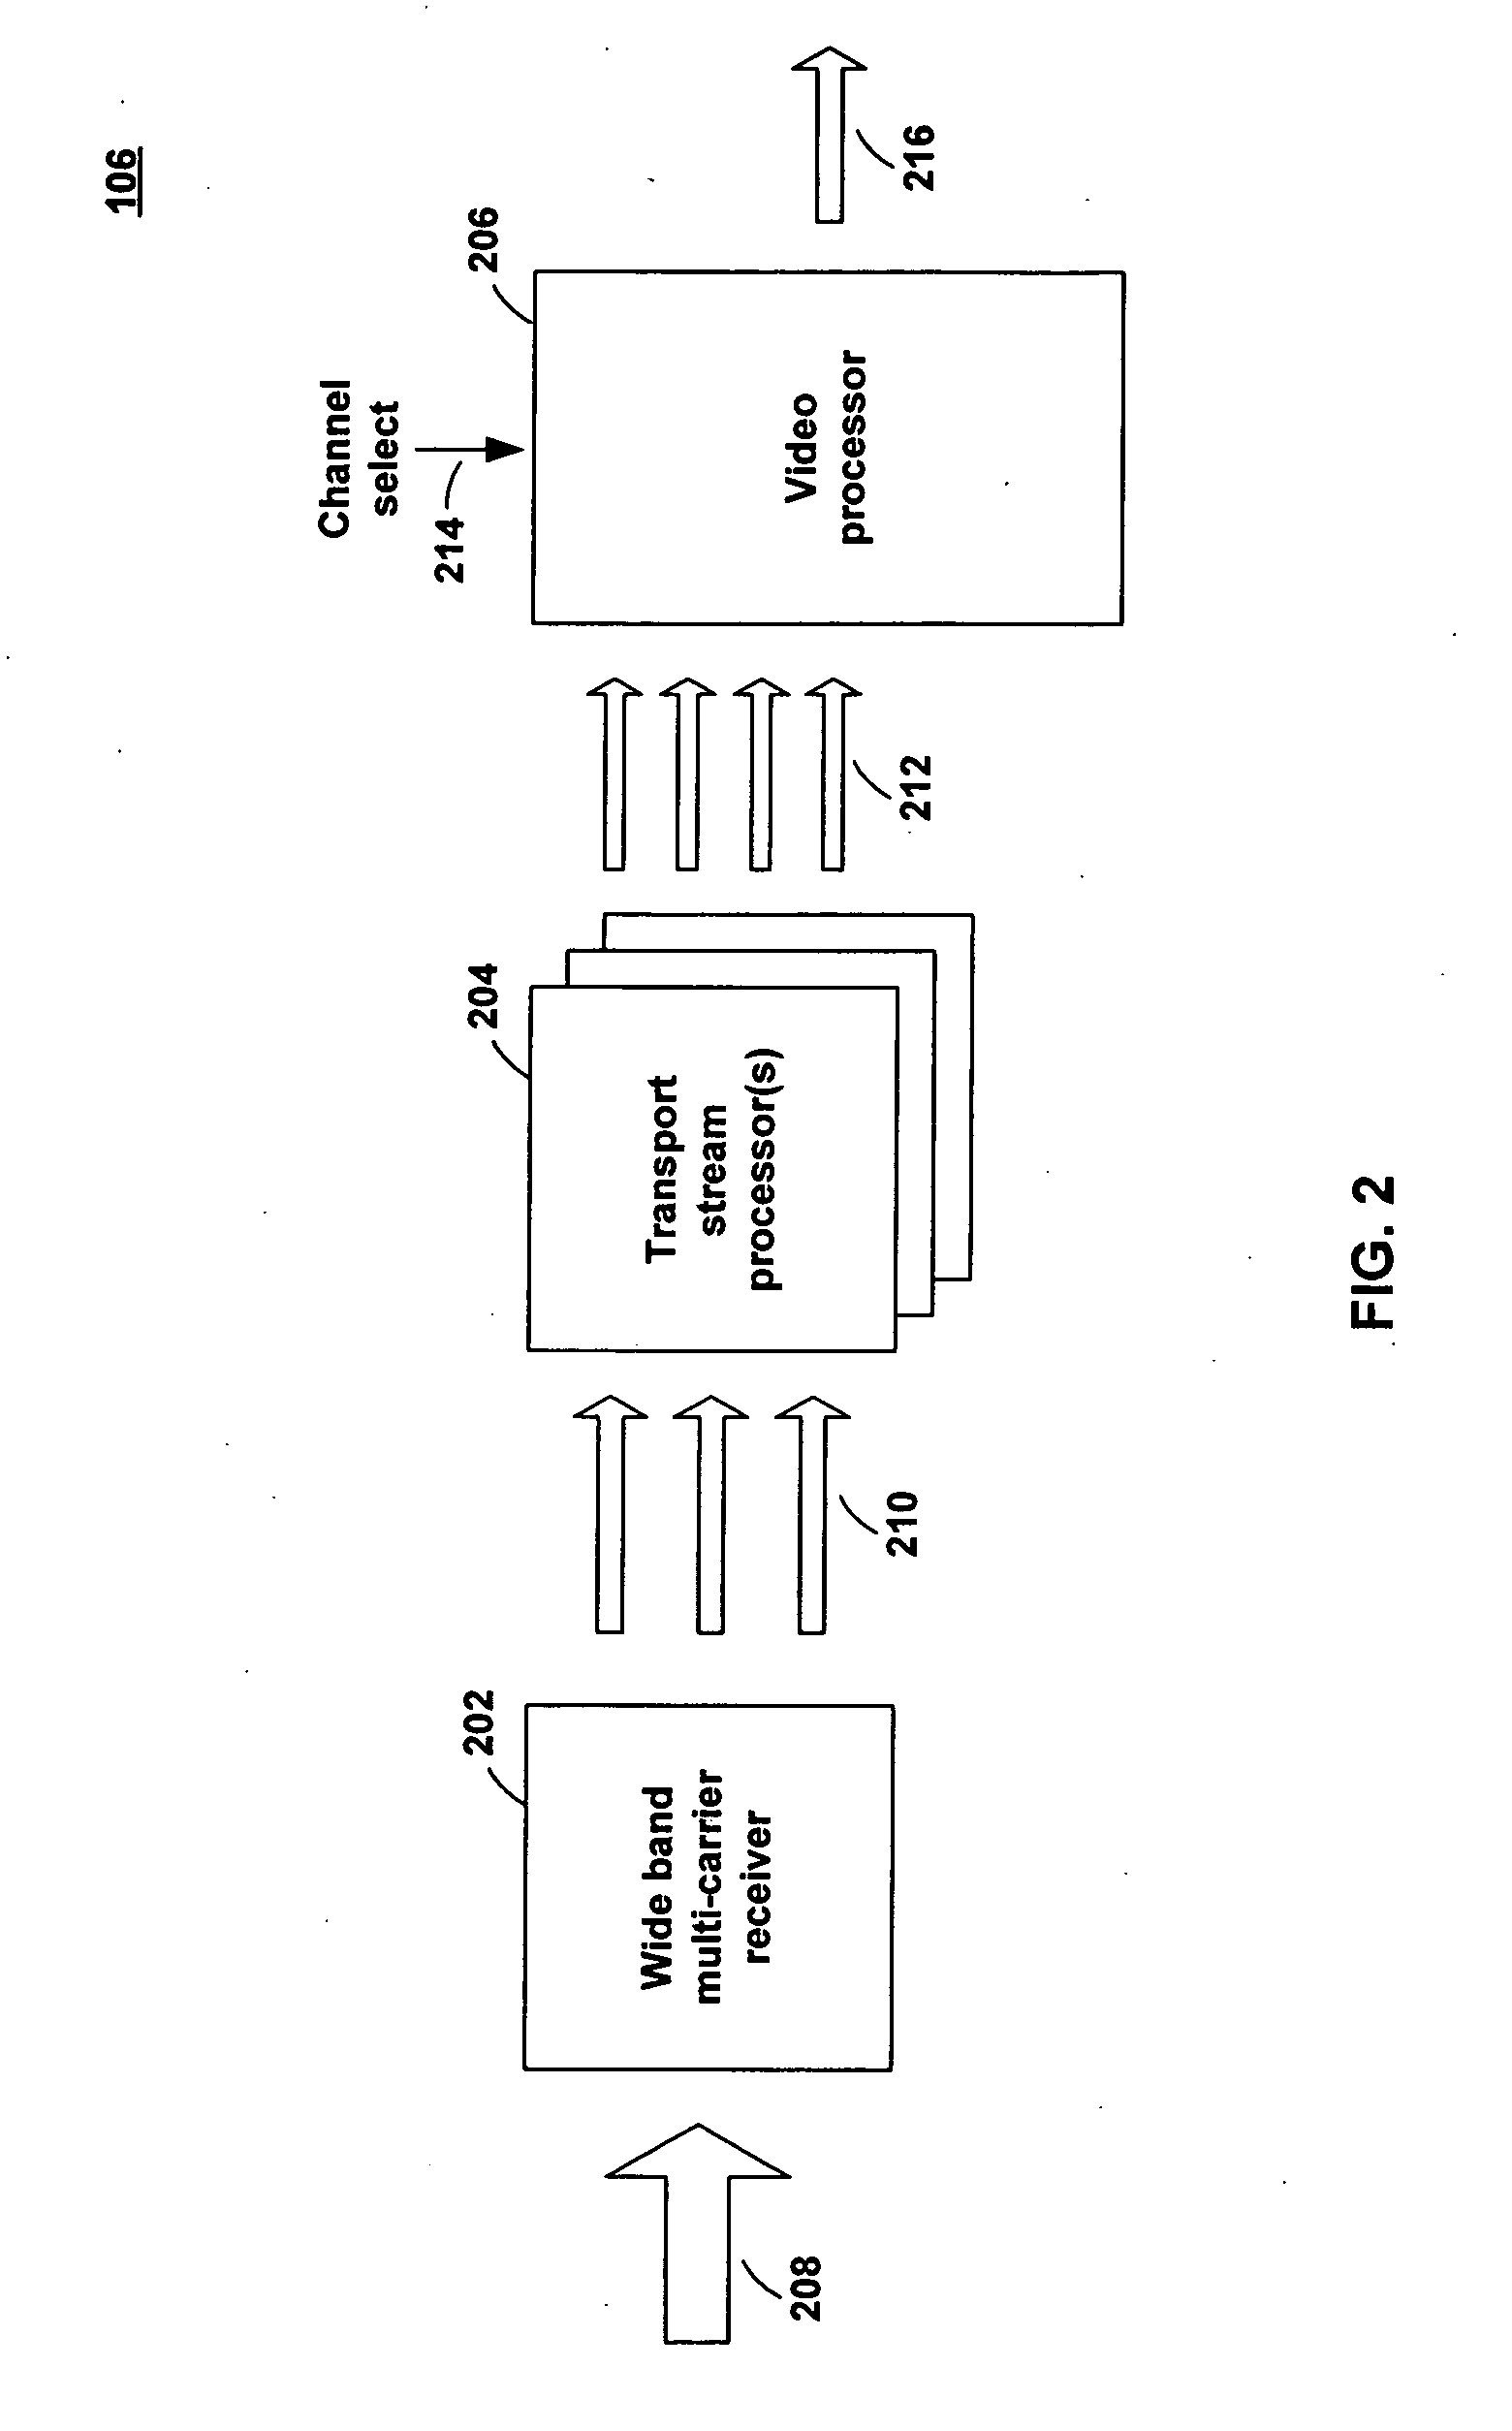 Method and system for providing faster channel switching in a digital broadcast system